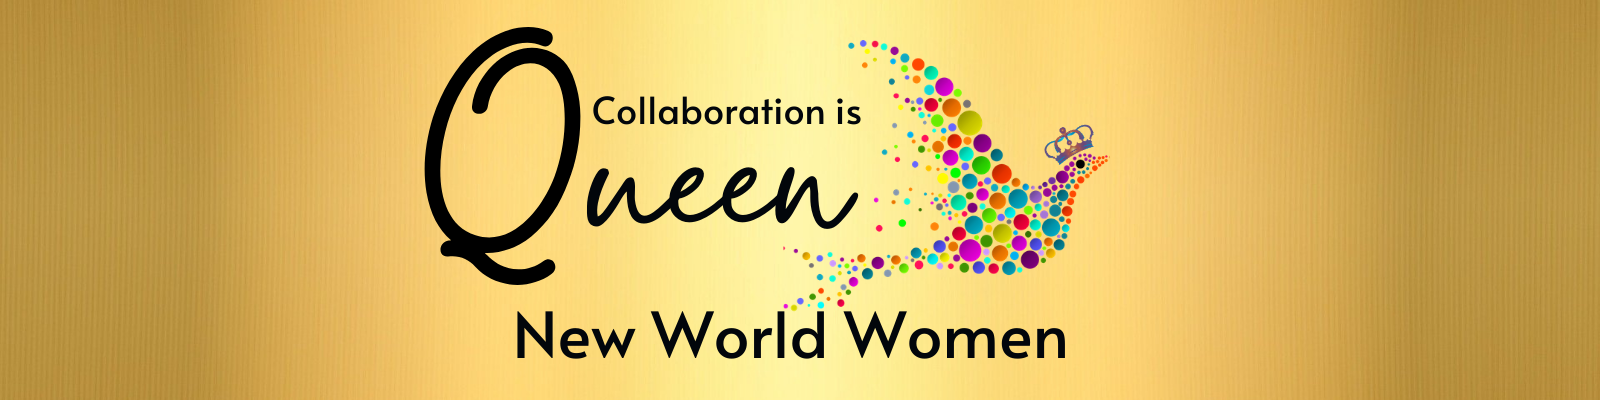 NEW WORLD WOMEN COLLABORATION IS QUEEN